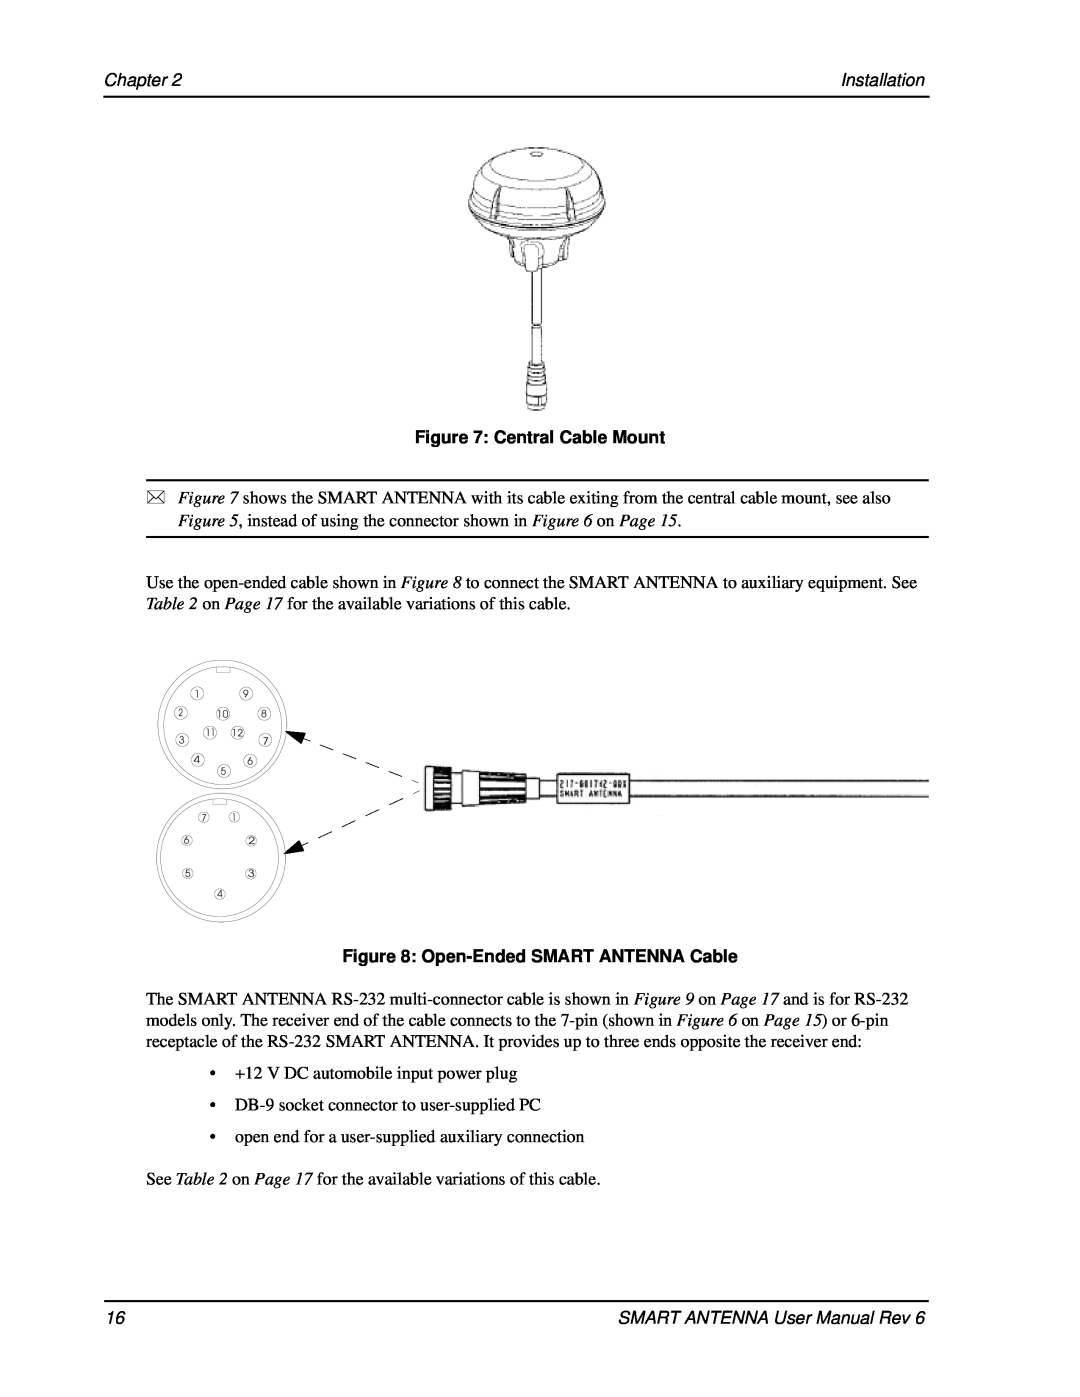 Novatel user manual Chapter, Installation, Central Cable Mount, Open-EndedSMART ANTENNA Cable 